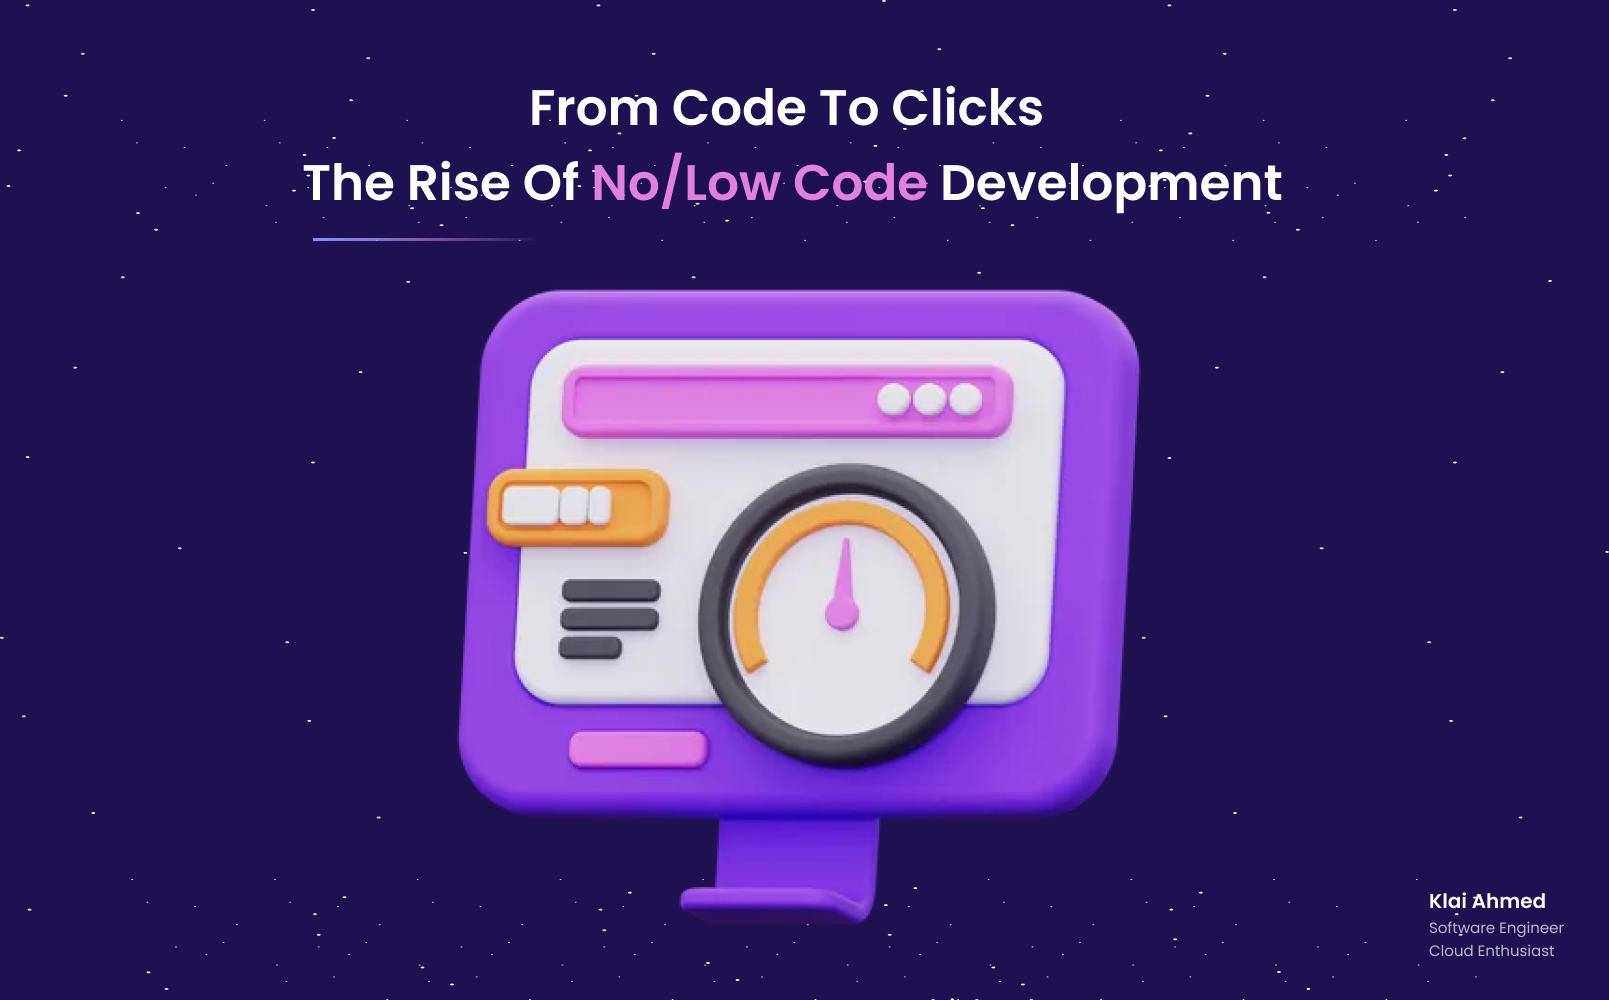 From Code to Clicks: The Rise of Low Code Development